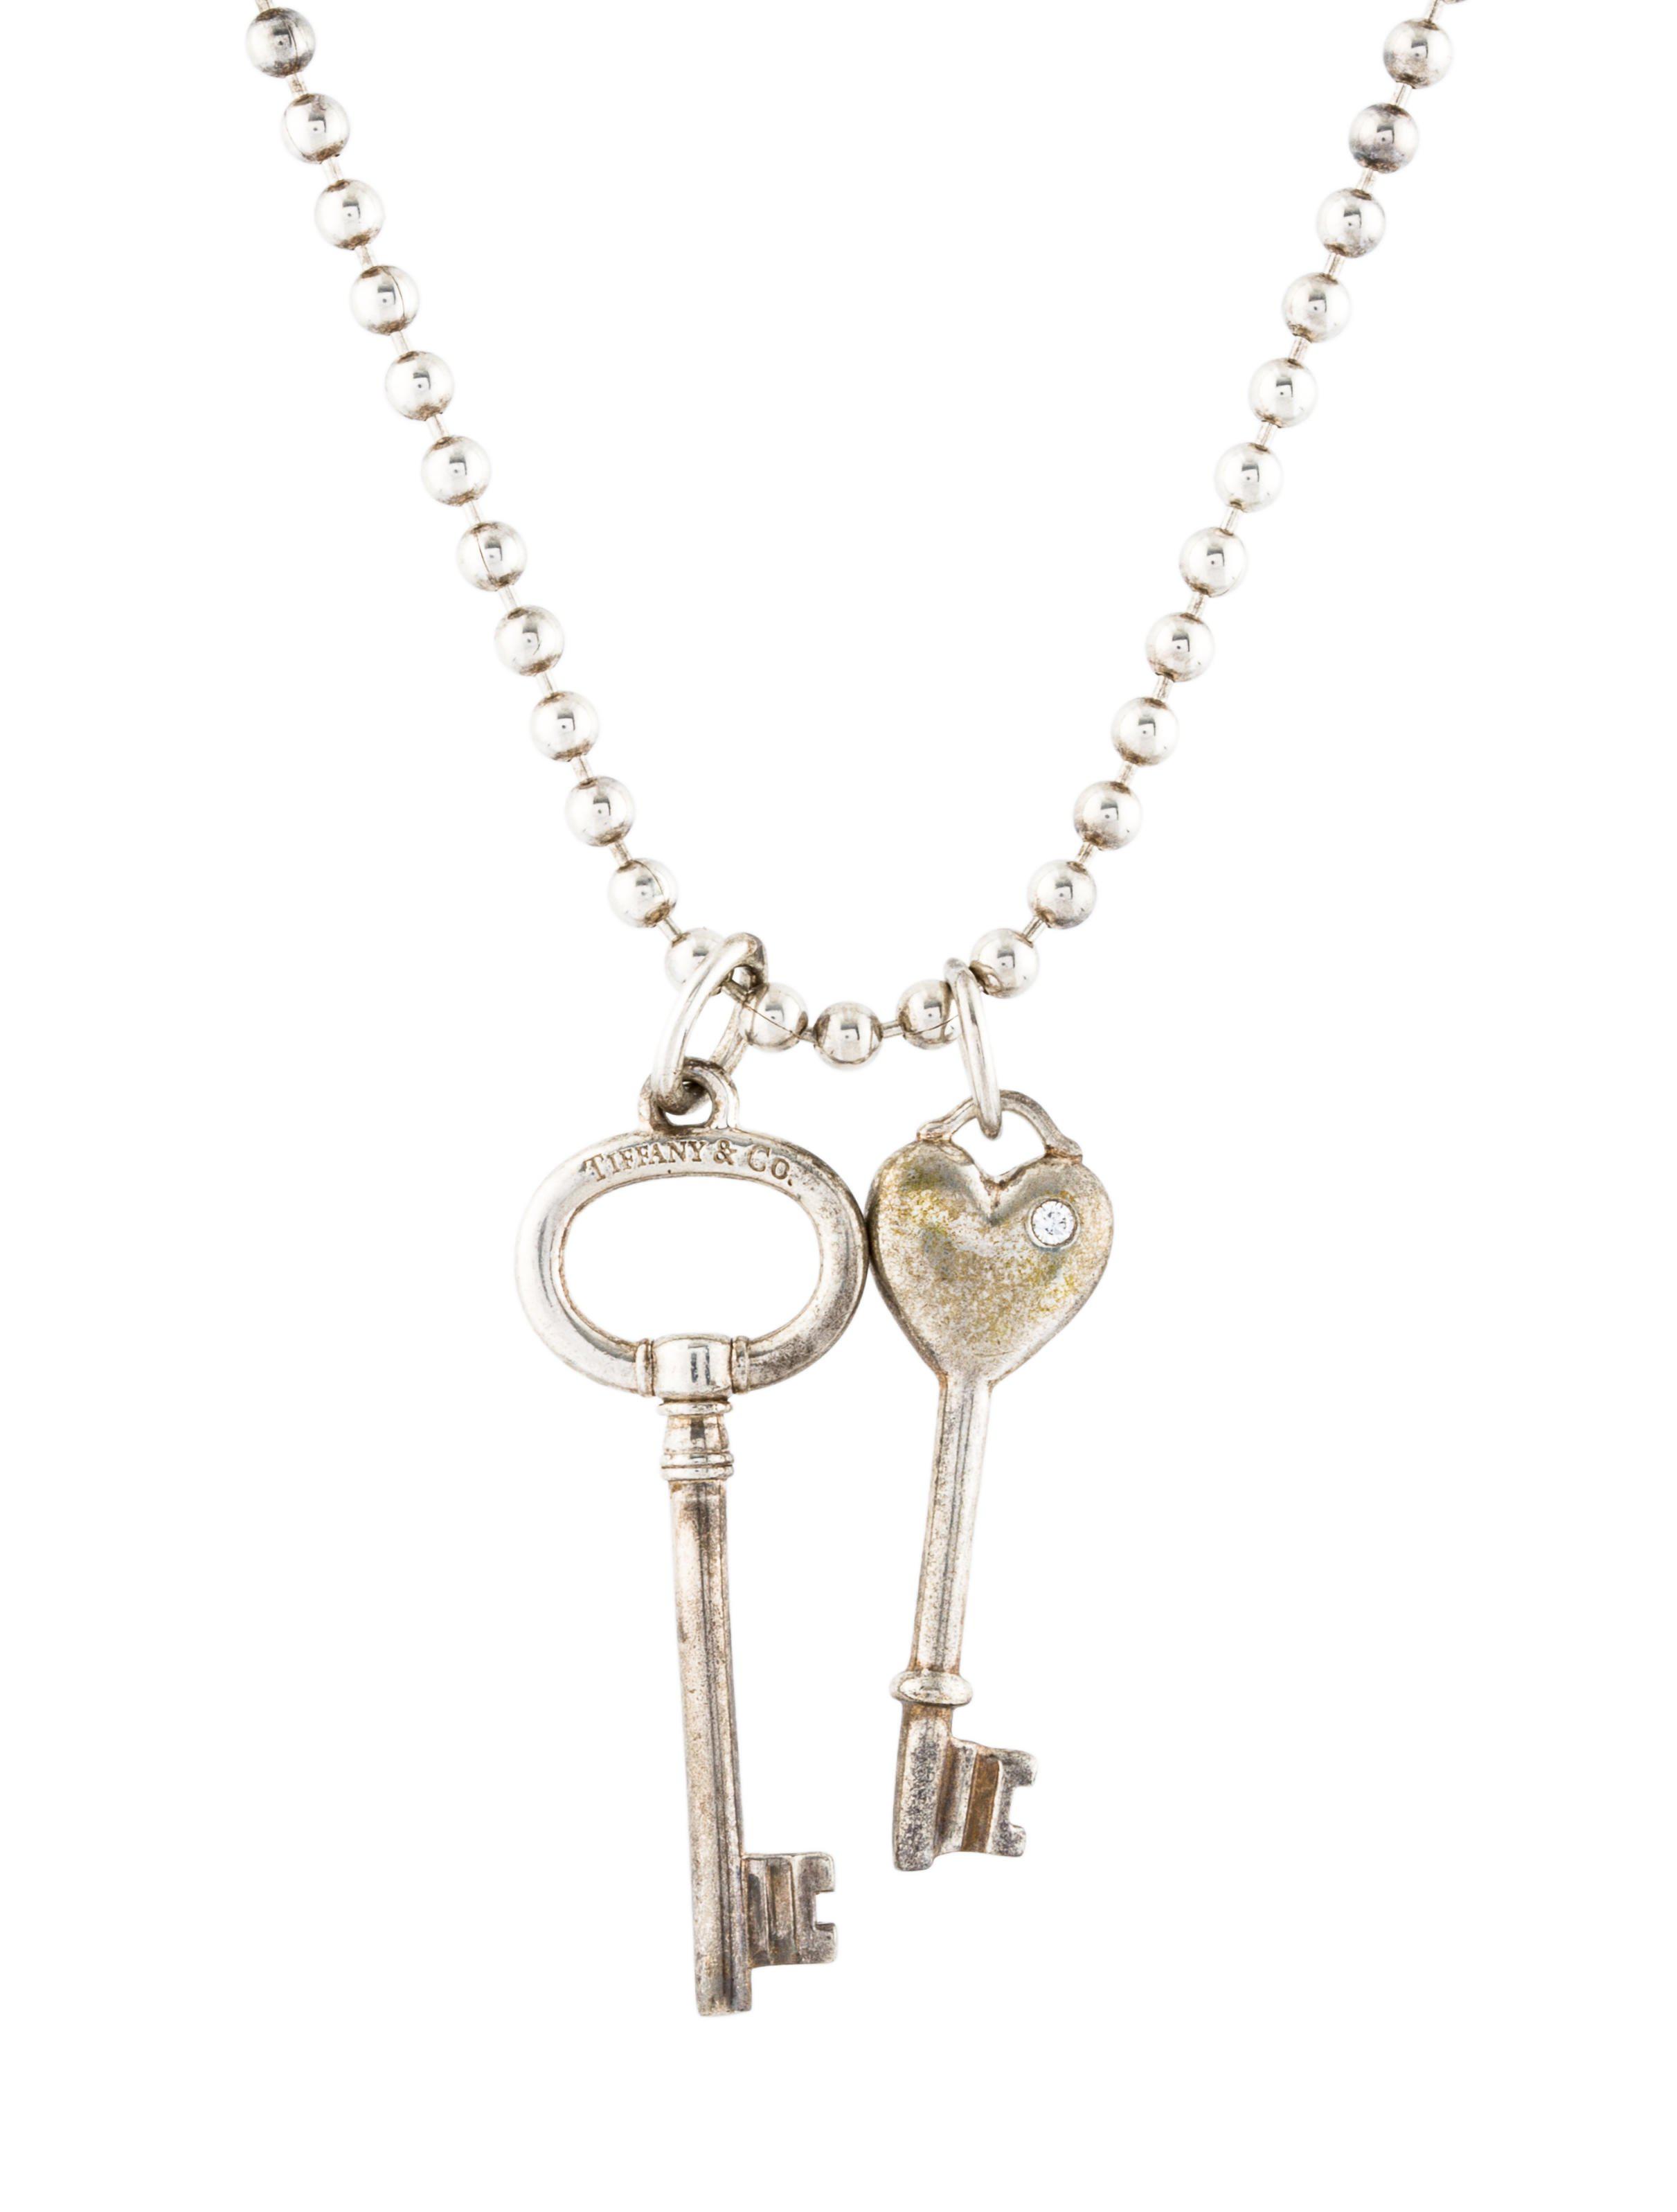 Lyst - Tiffany & Co Two Key Charm Pendant Necklace Silver ...